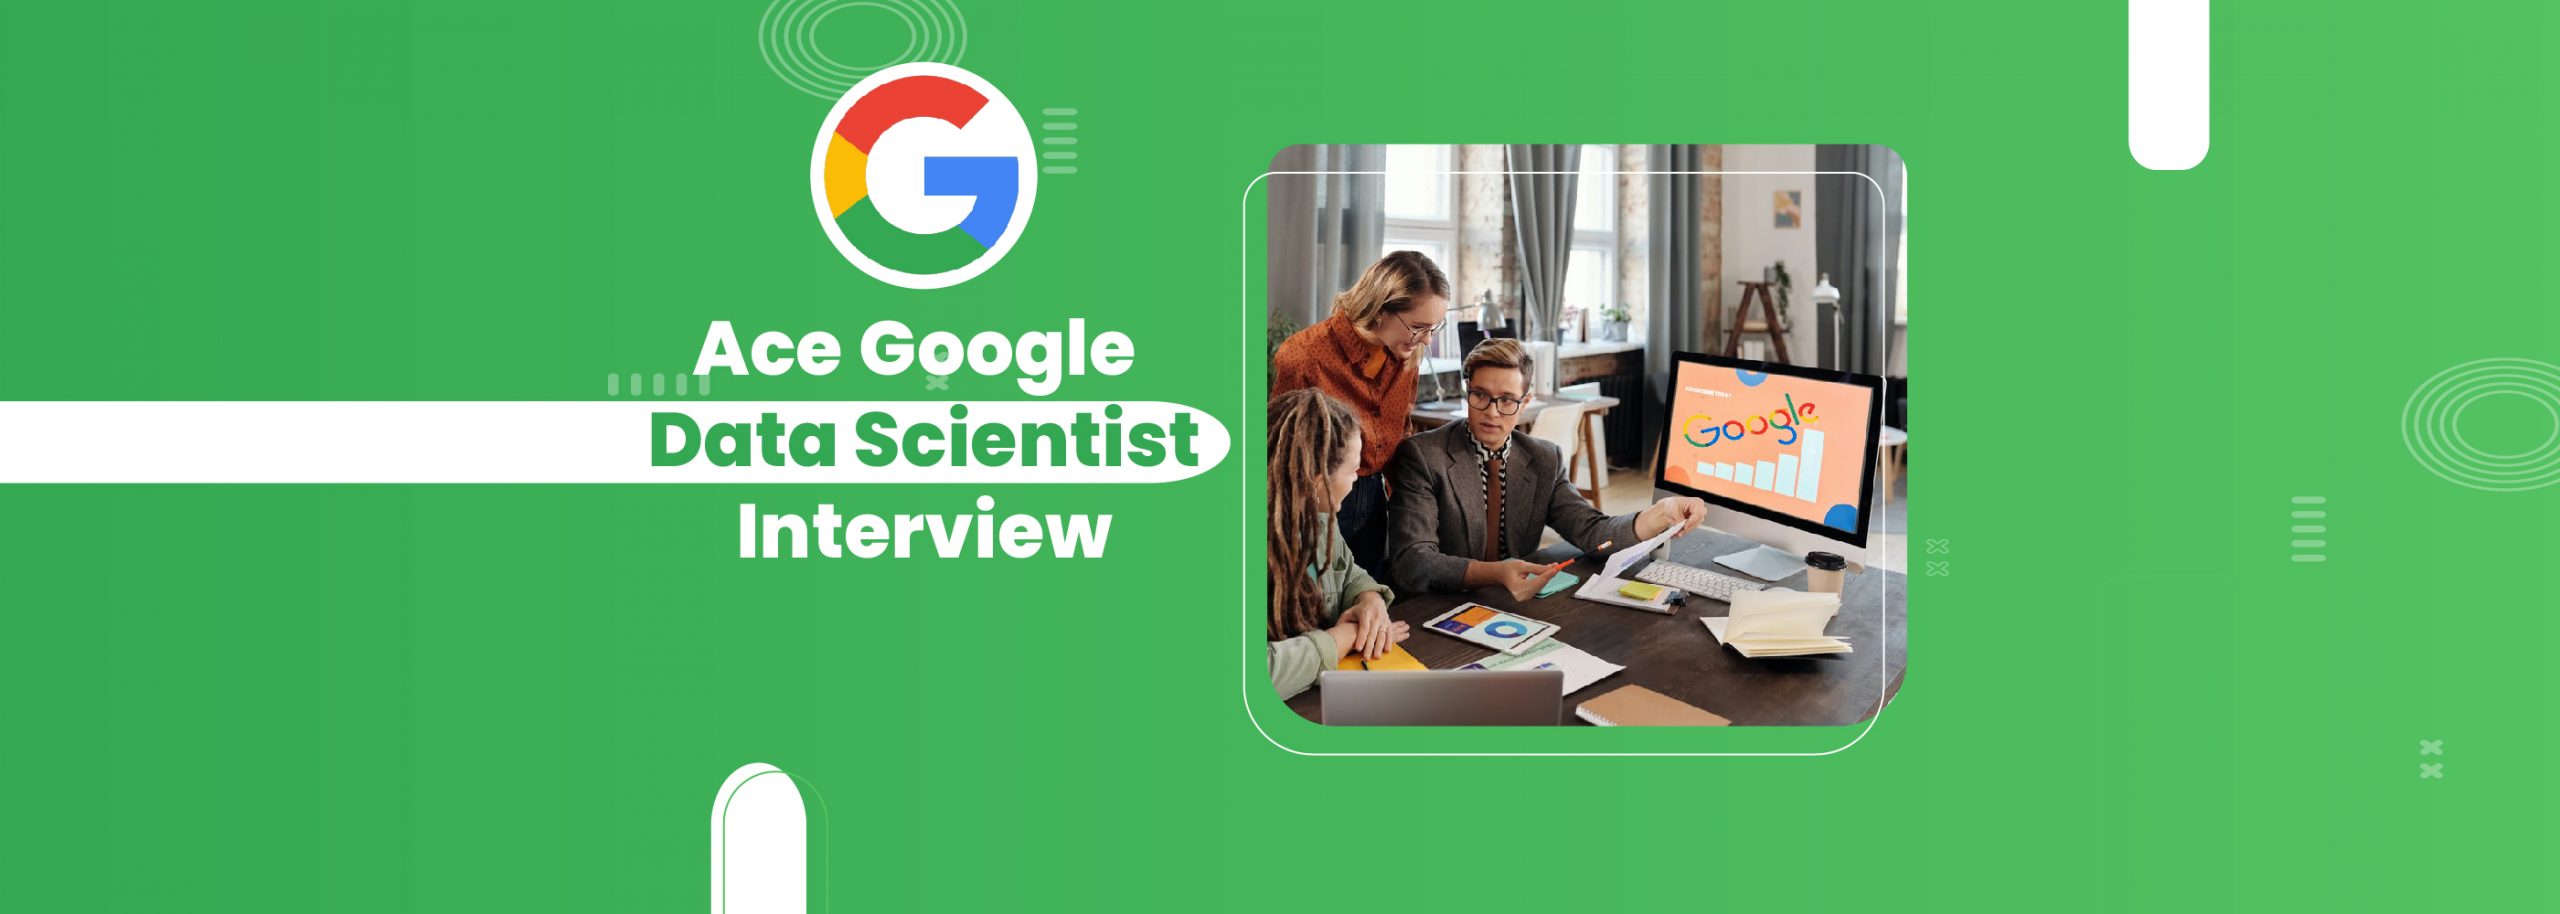 How to Ace Google Data Scientist Interview in 4 Easy Stages